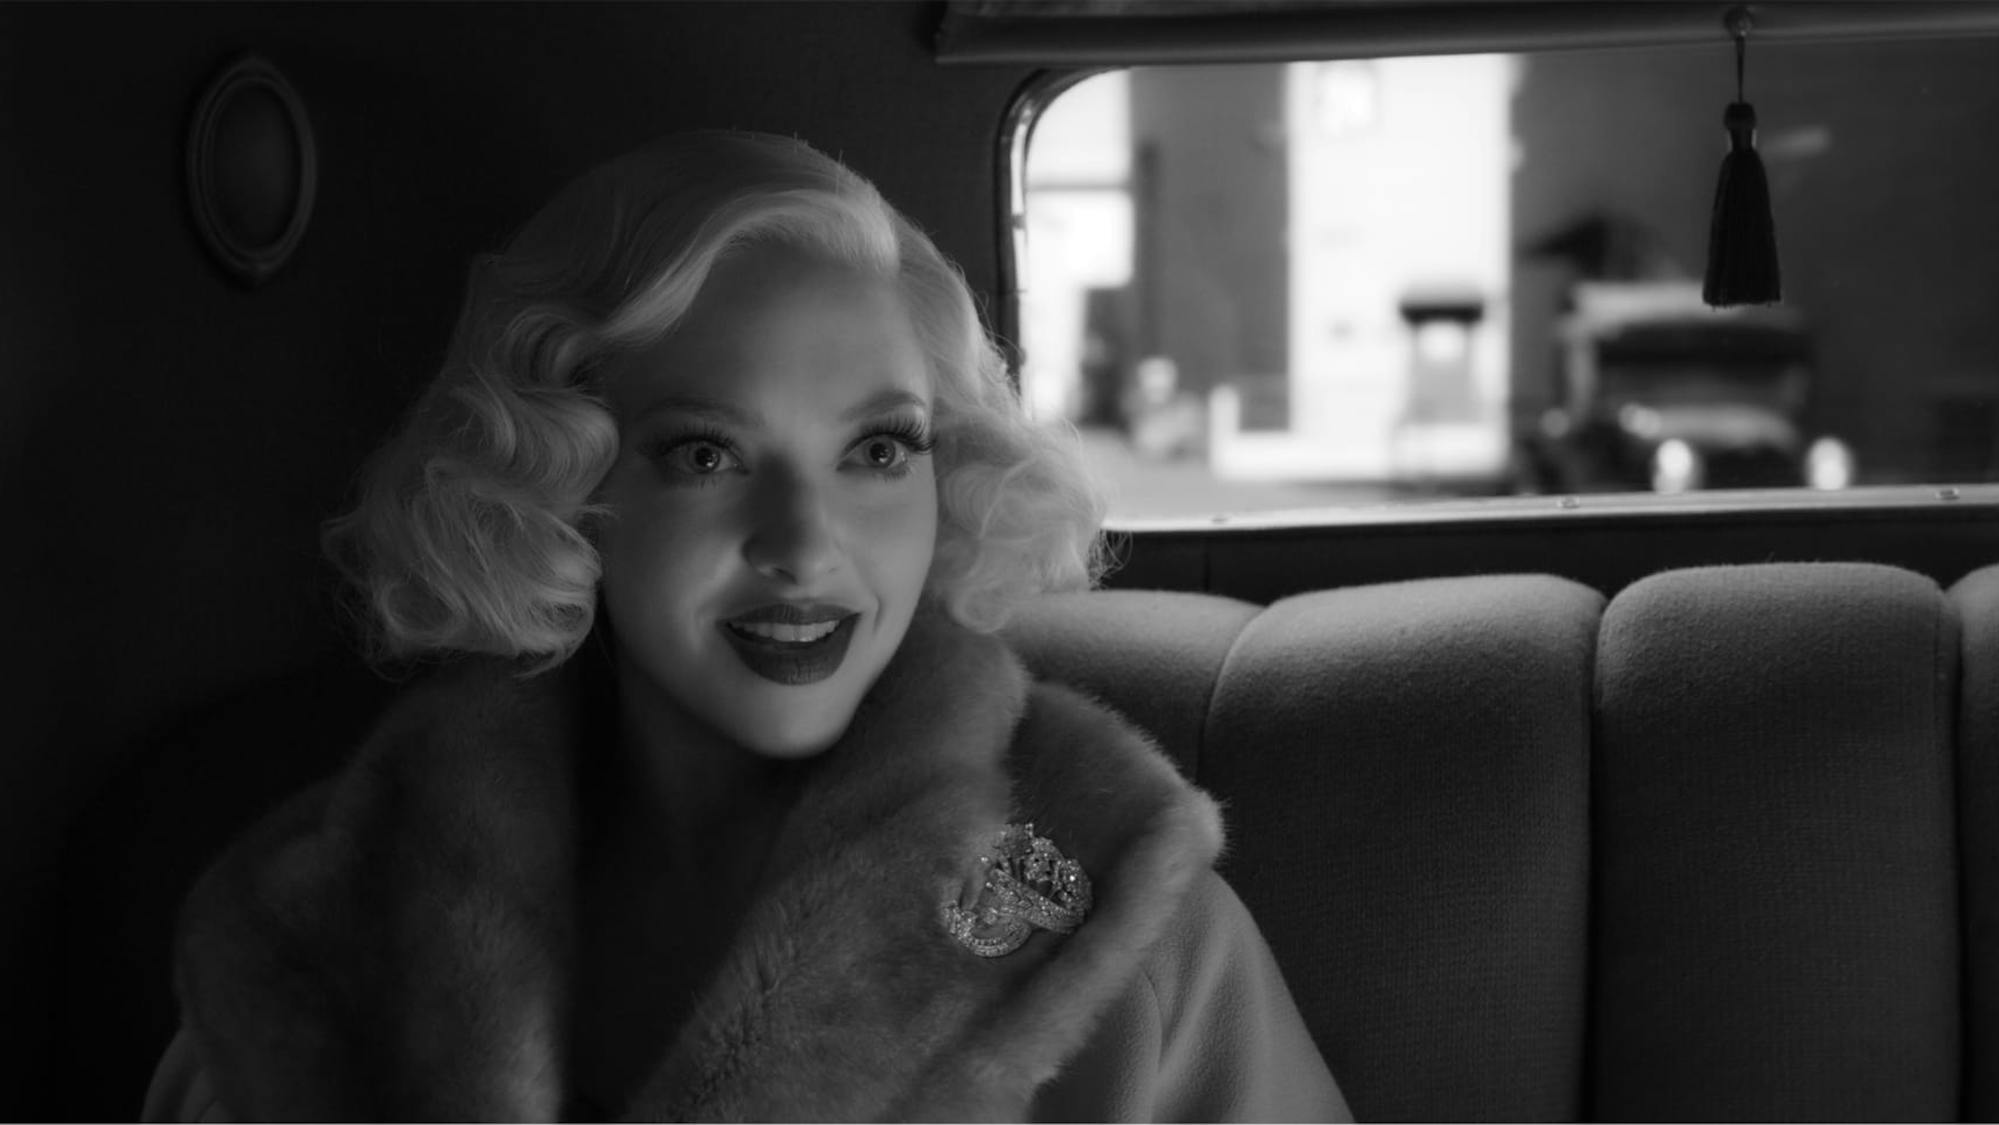 In a shot from the film, we see how those lipstick debates pay off in black and white. The contrast on Seyfried is just so. 